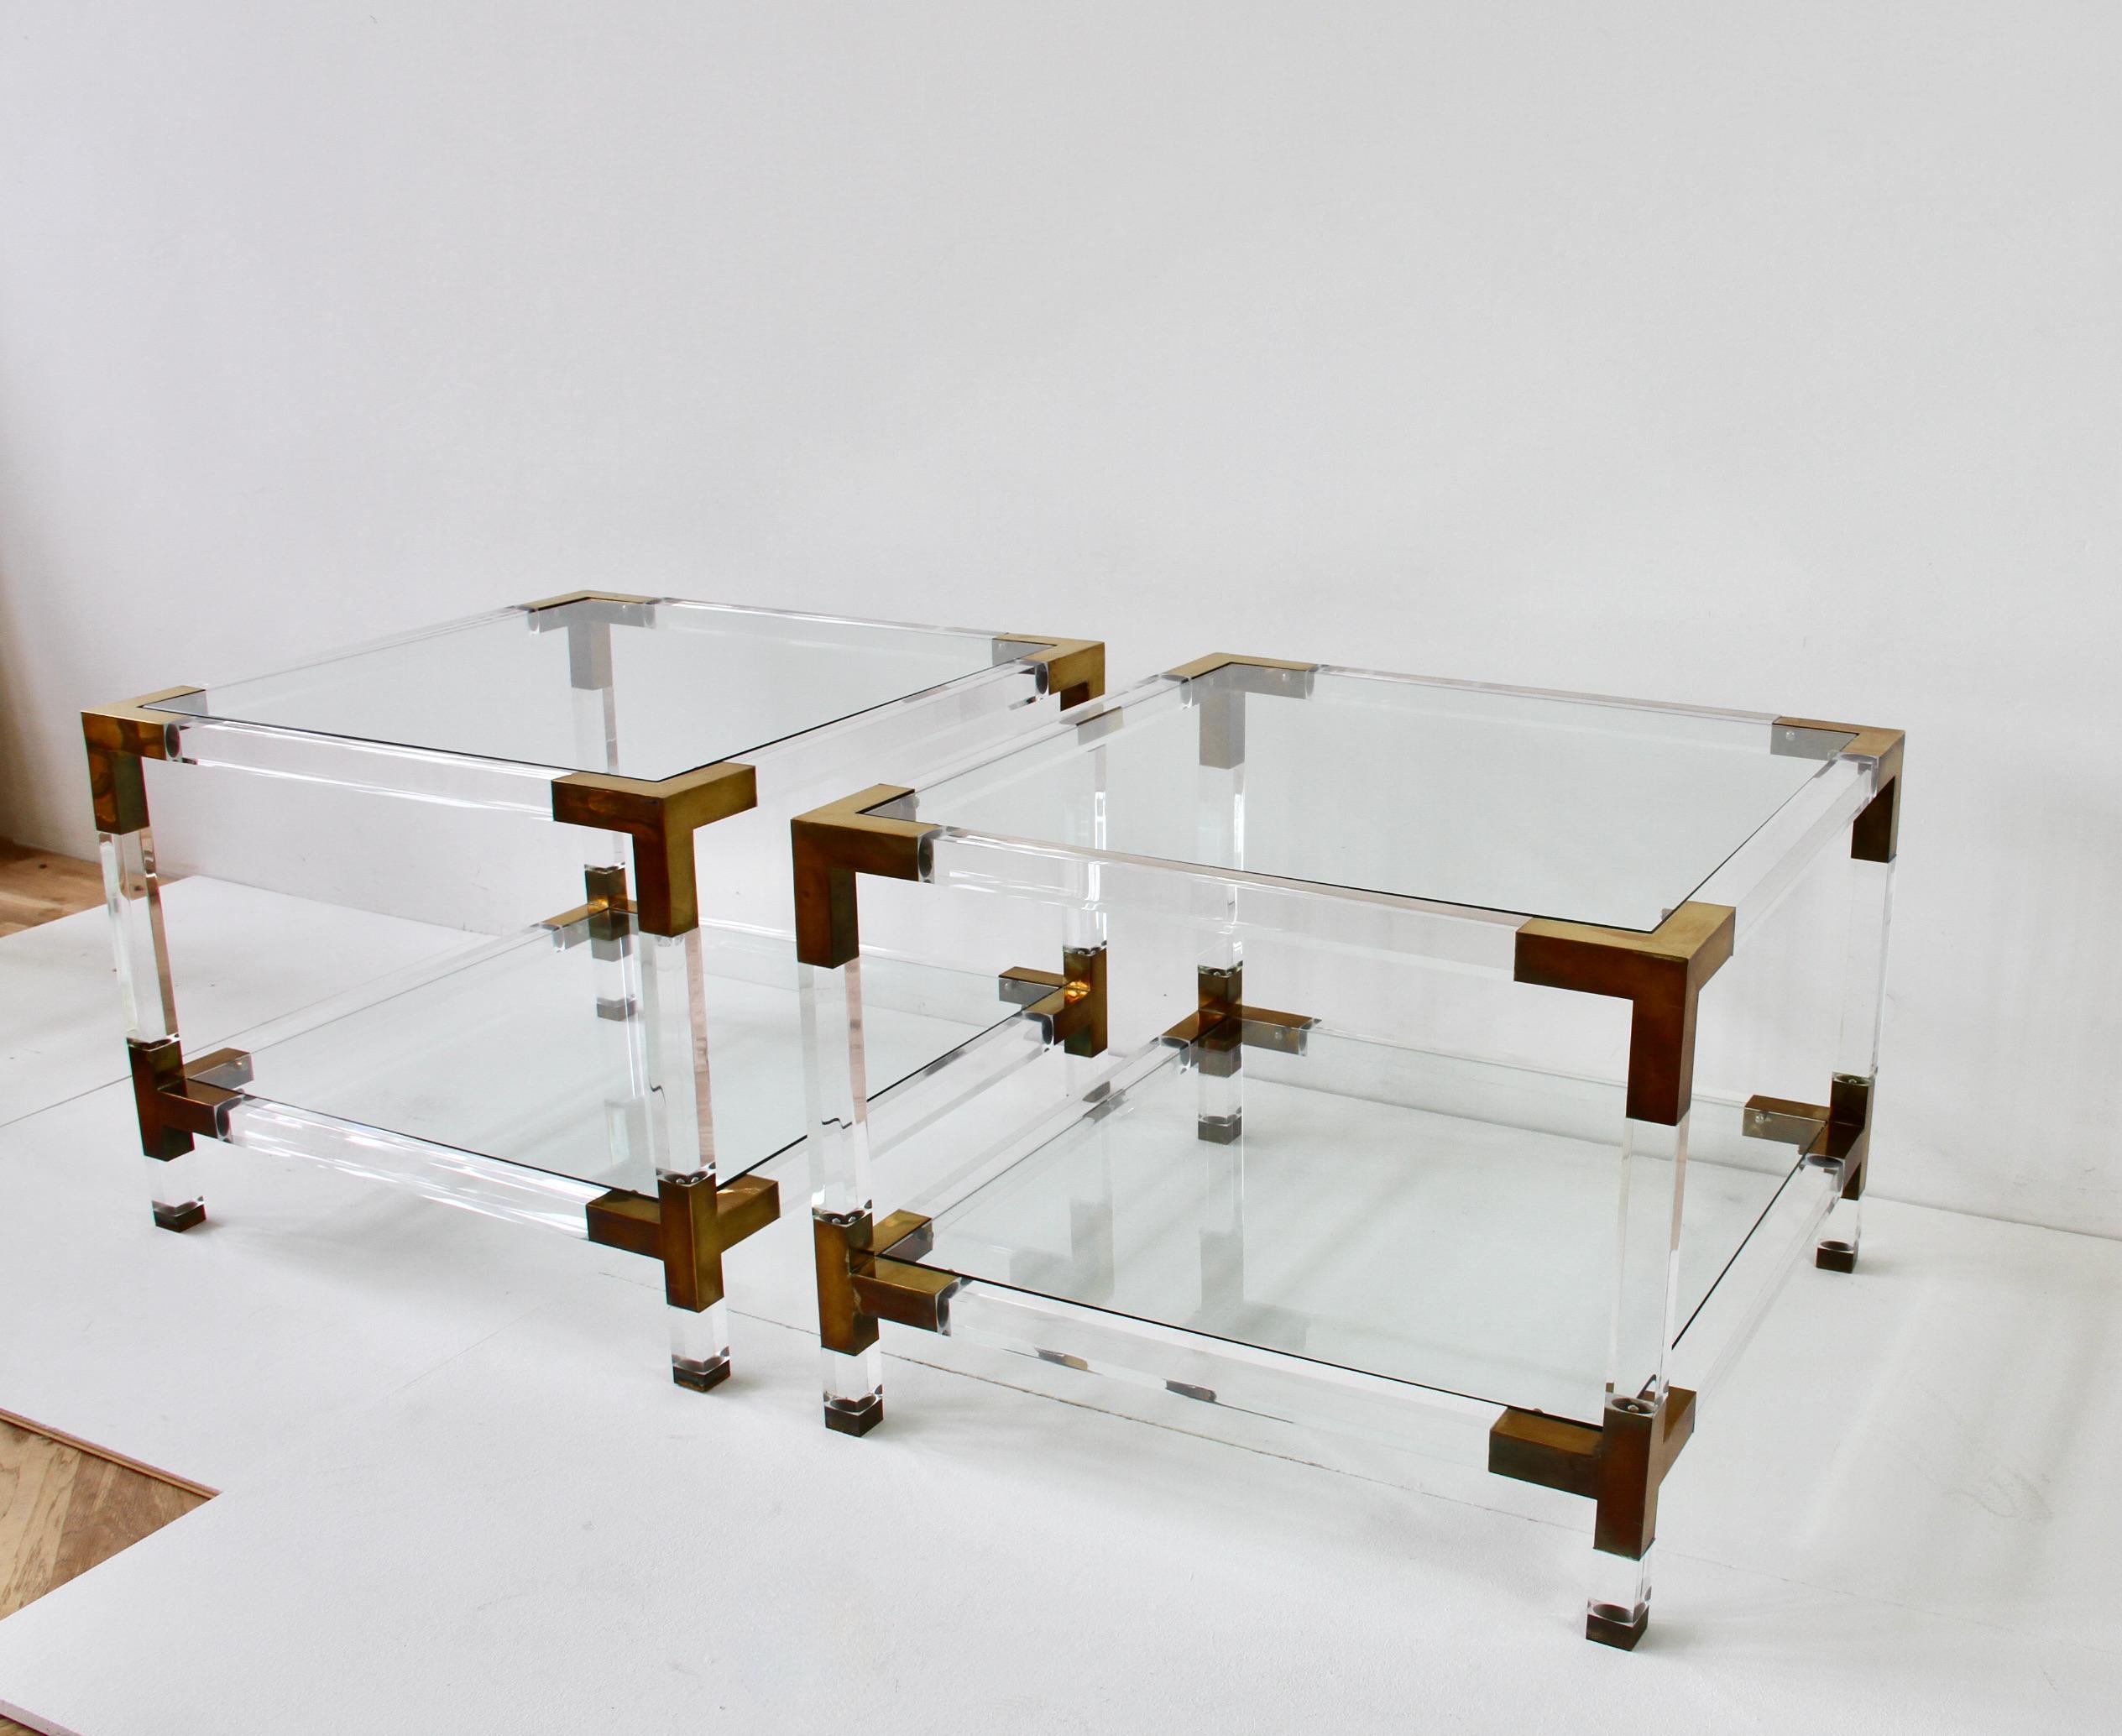 Plated Pair of Hollis Jones Style Vintage Acrylic/Lucite Brass Side Tables, circa 1970s For Sale